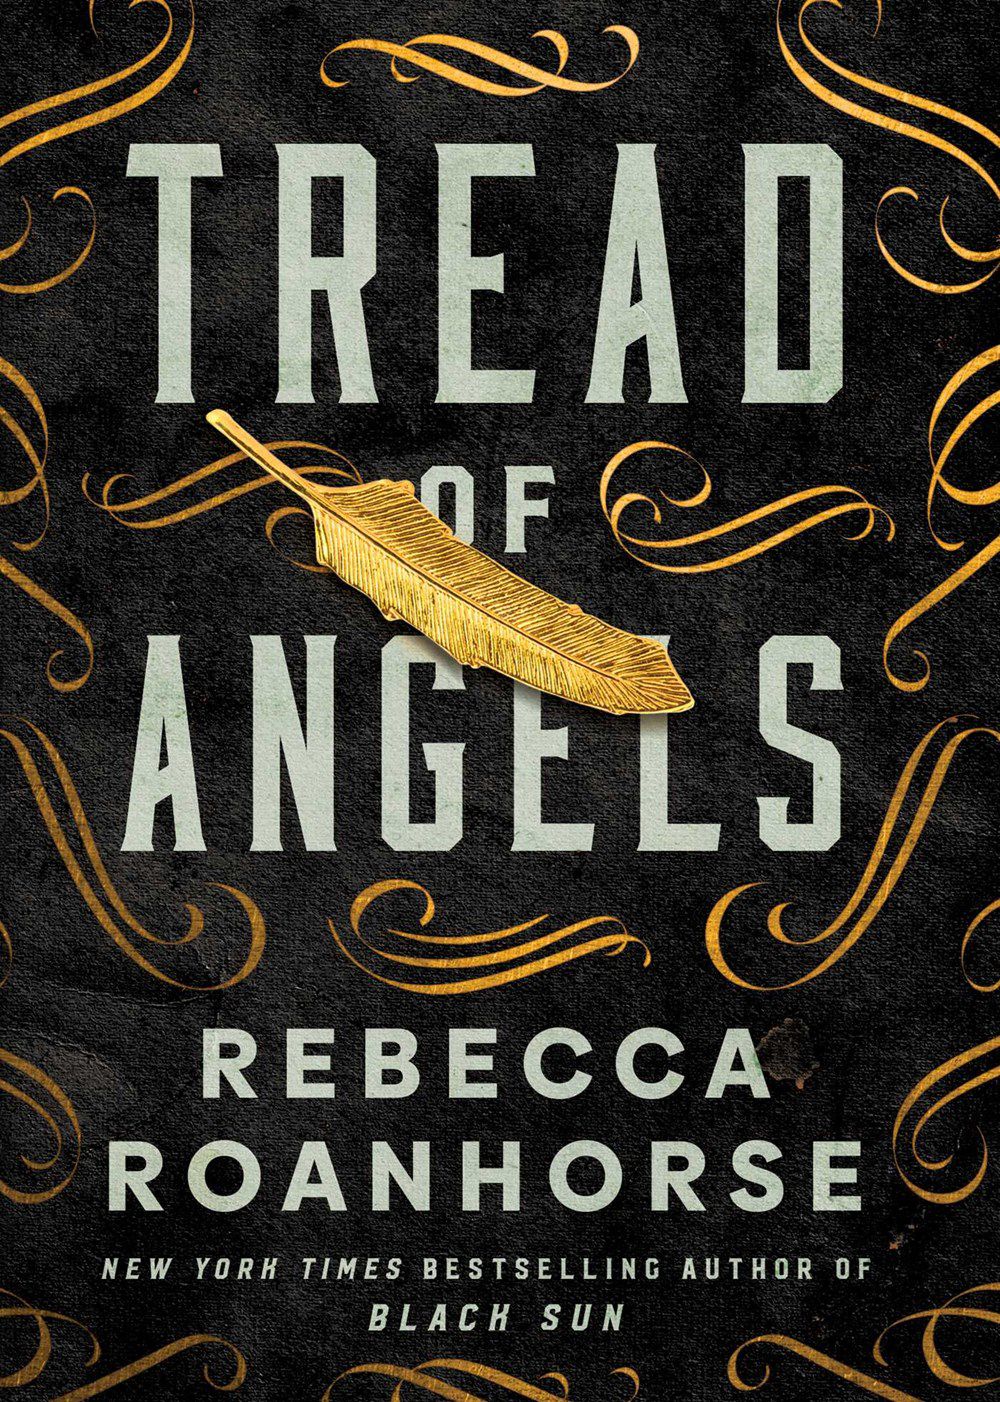 Cover art for Rebecca Roanhorse’s Tread of Angels, featuring a gold feather